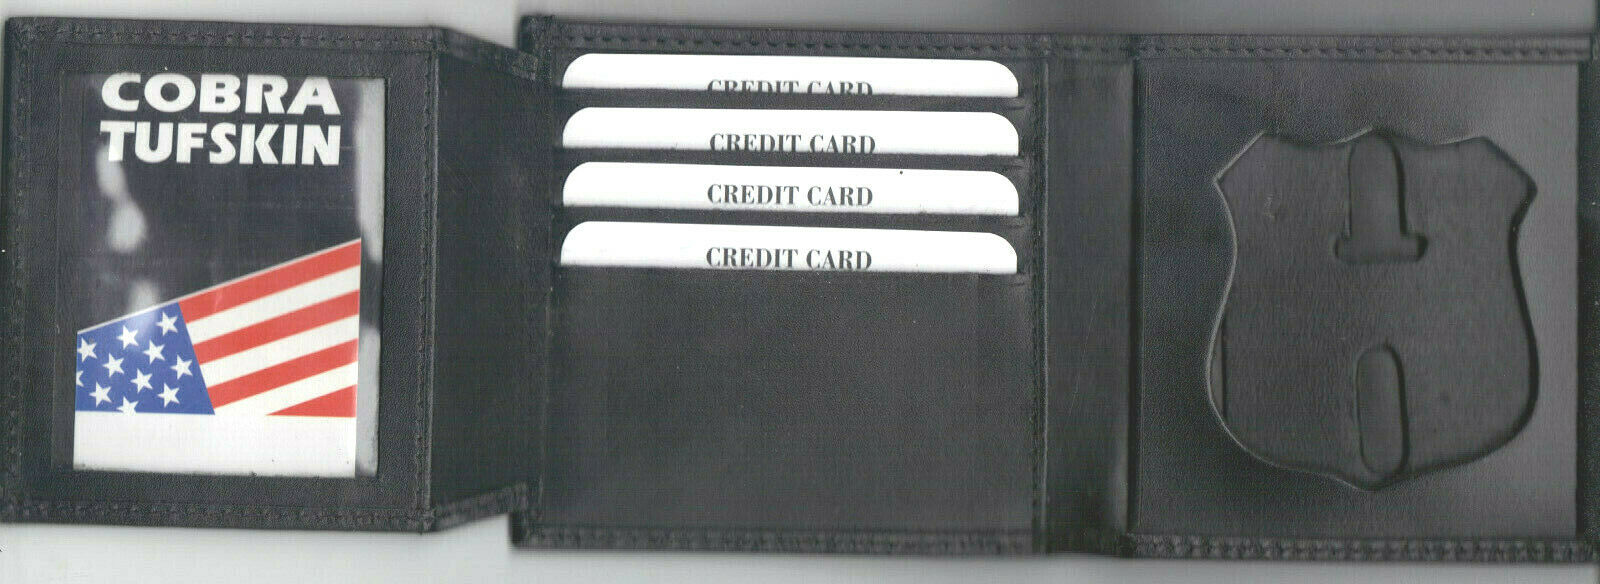 Franklin Plaza Police Officer (NY) Dual-ID Tri-Fold Money/Credit Card Wallet